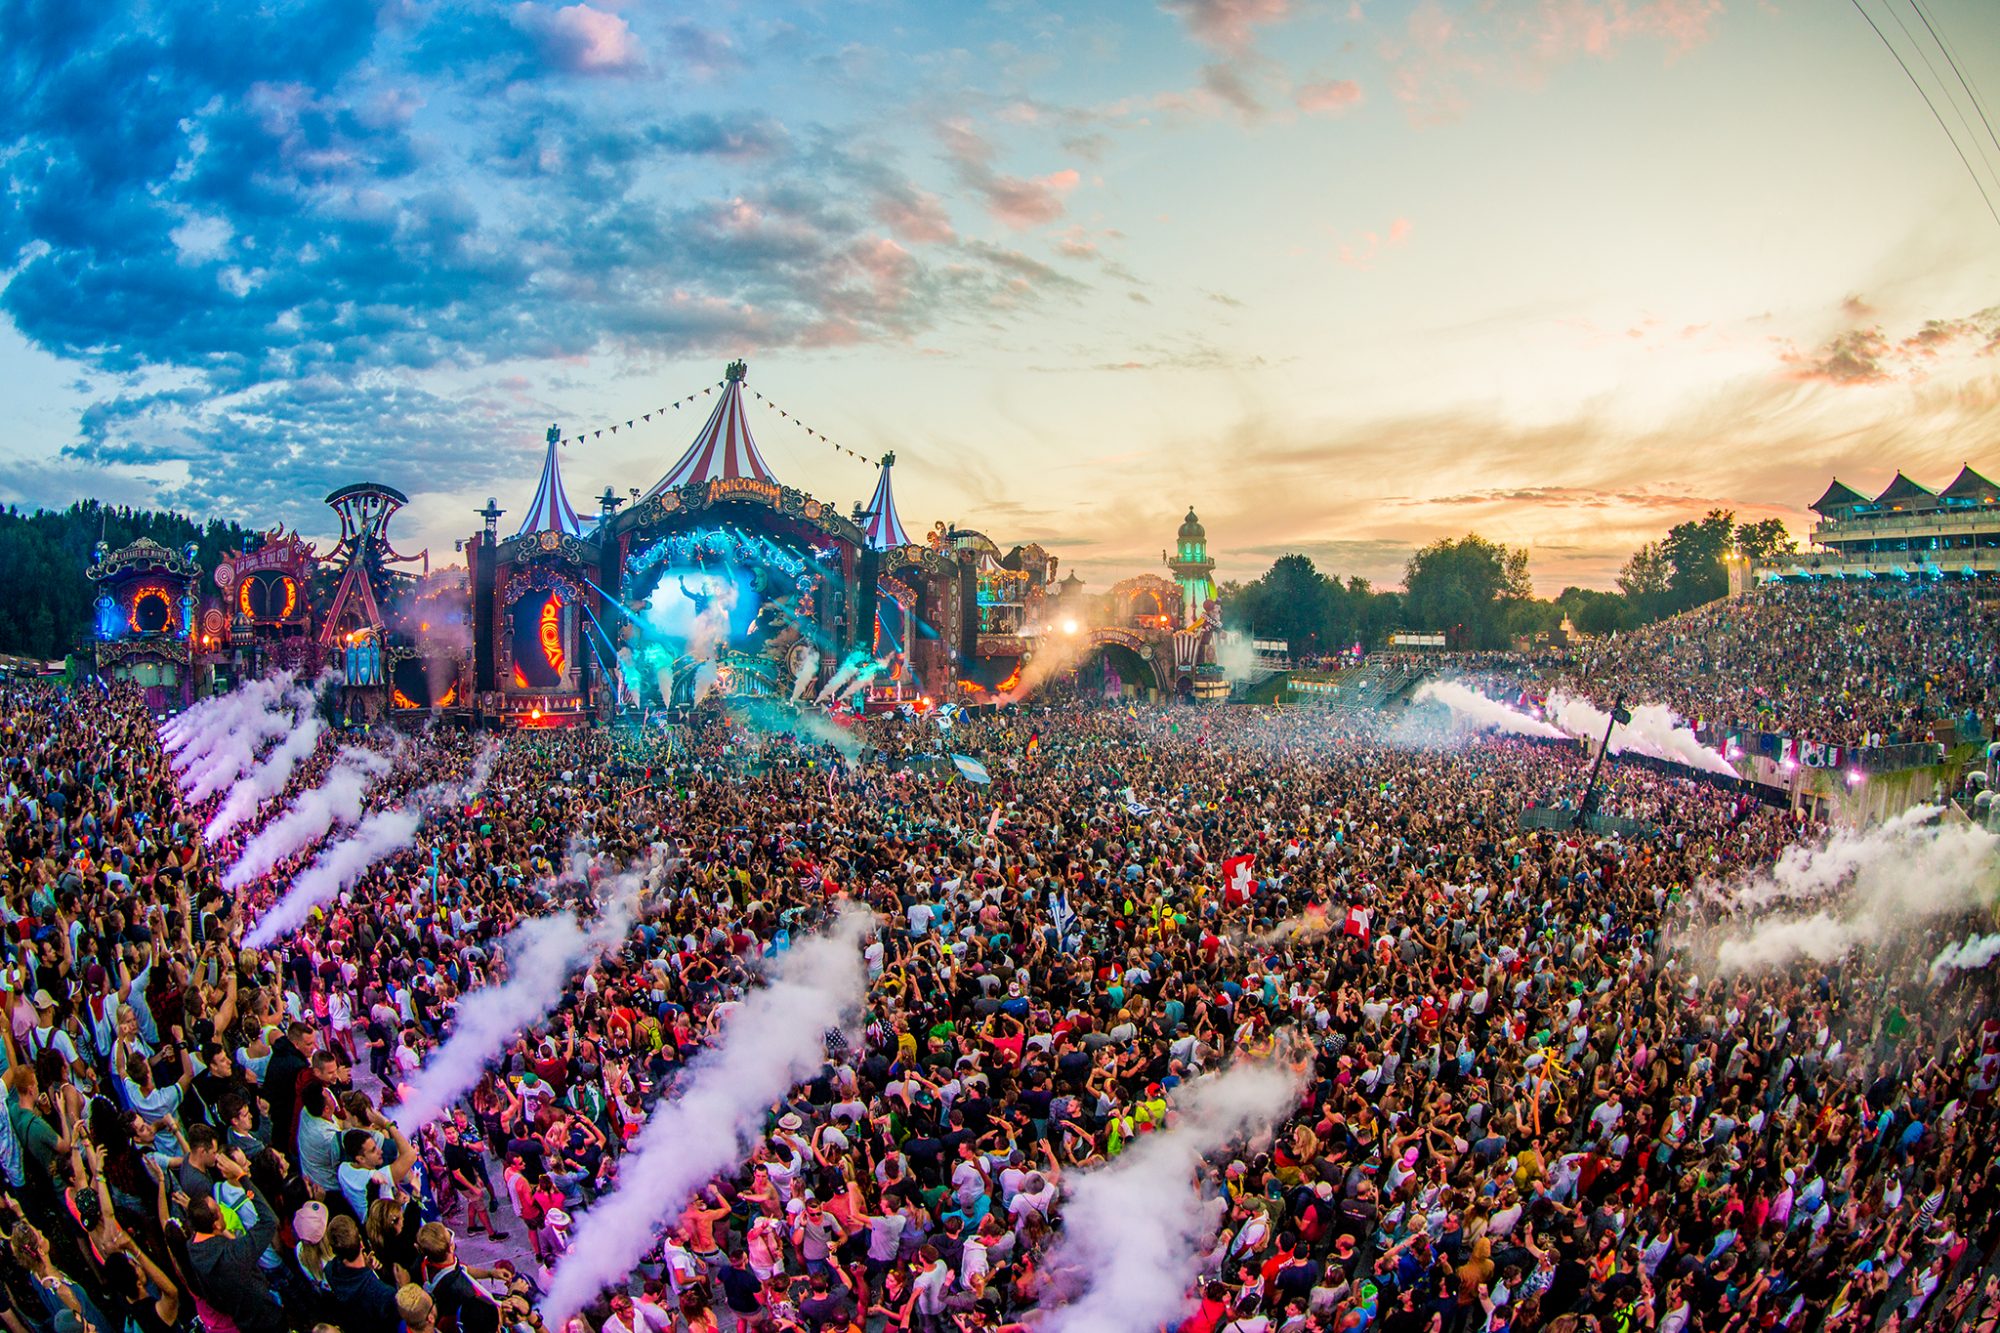 Tomorrowland The world’s most popular festival is coming to the French